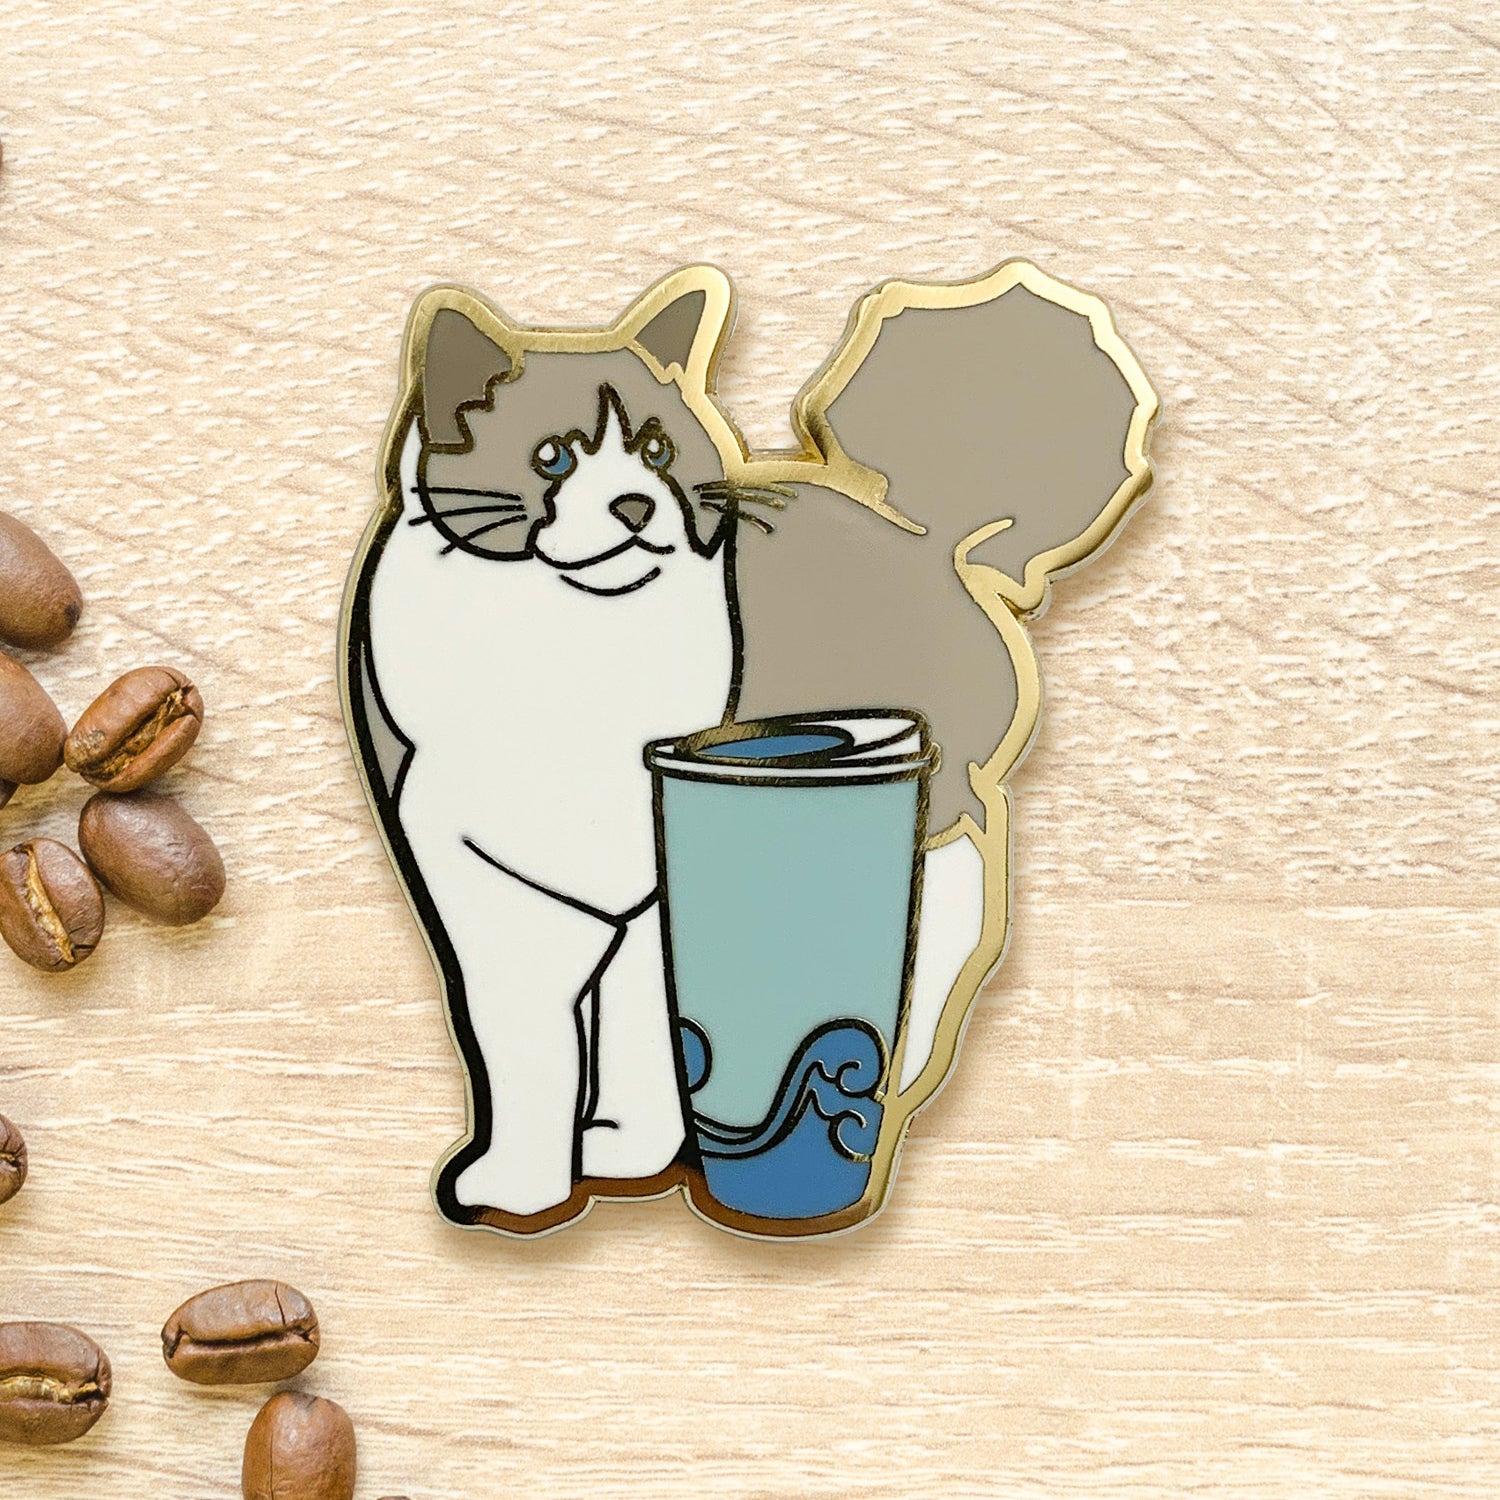 Rag Doll & Coffee Hard Enamel Pin by Cocktail Critters